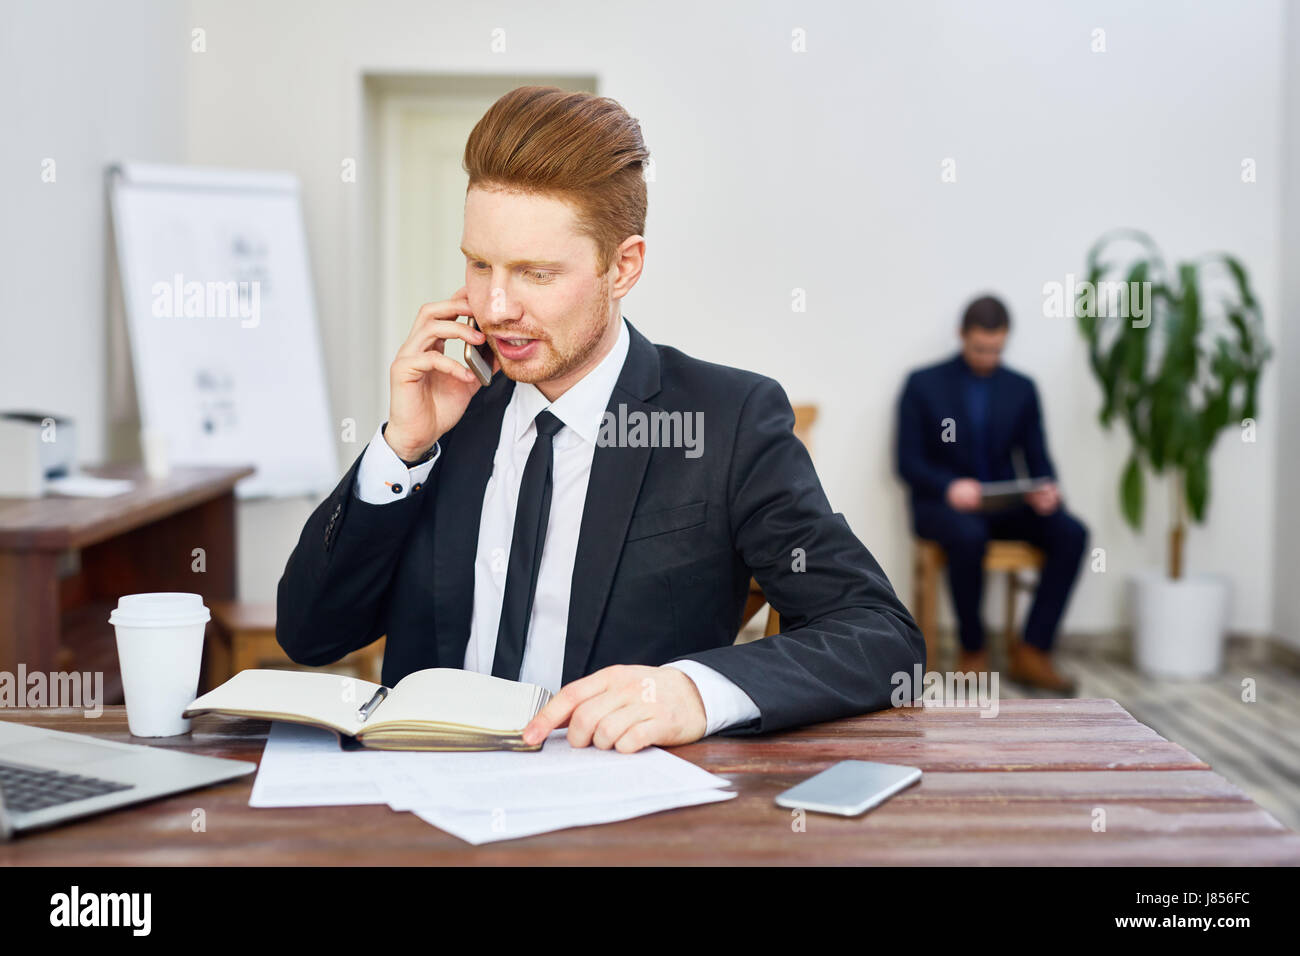 Portrait of young red haired man in business suit working in office answering phone calls Stock Photo